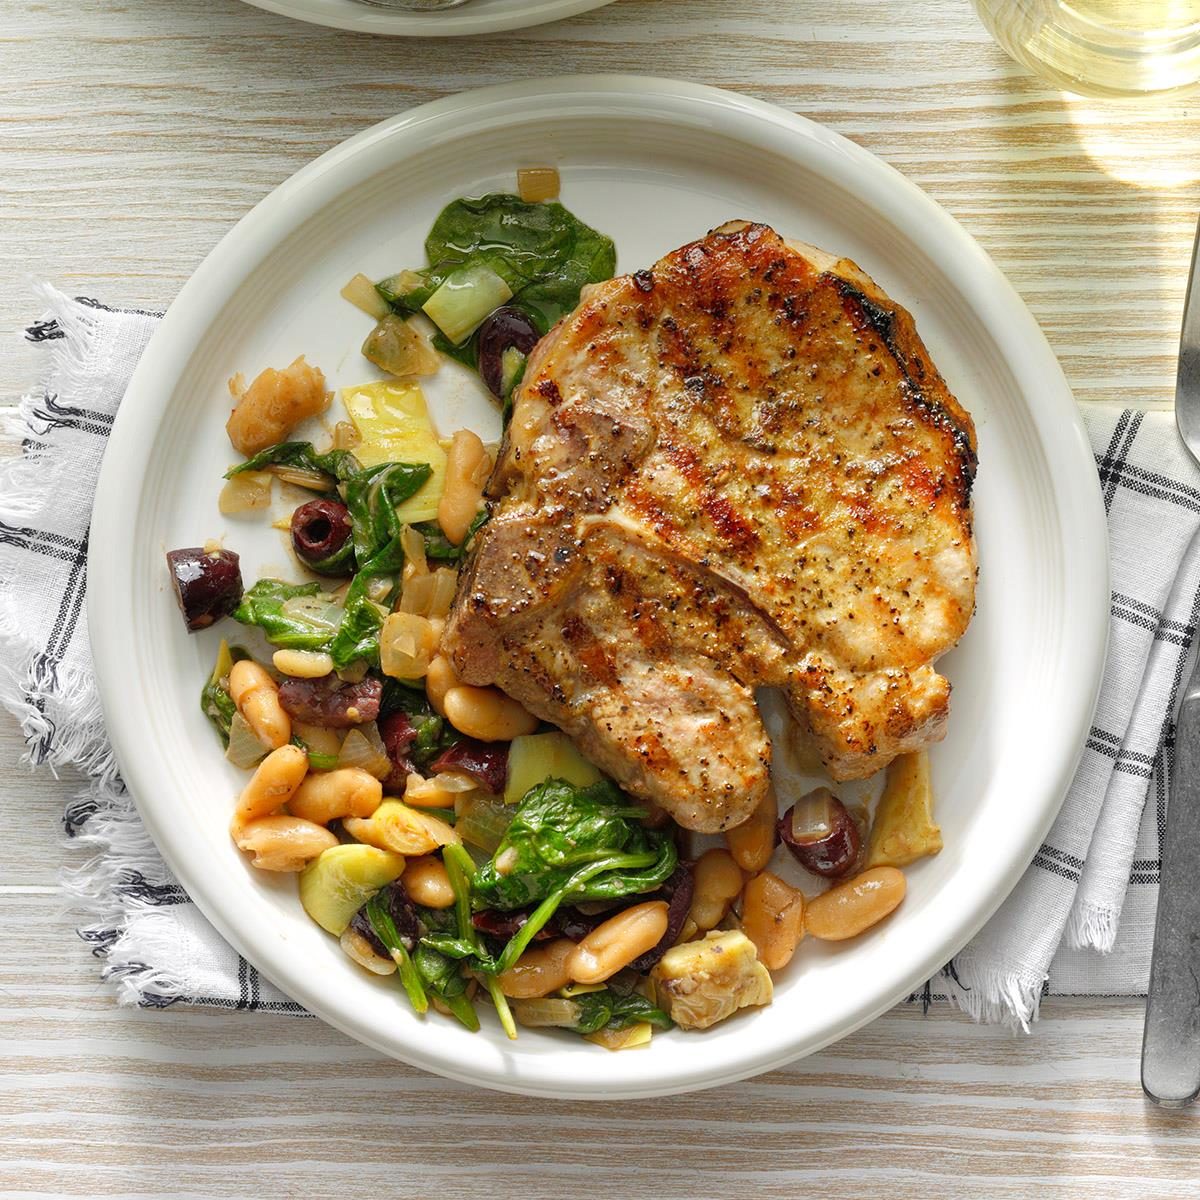 https://www.tasteofhome.com/wp-content/uploads/2020/08/Dry-Rub-Grilled-Pork-Chops-Over-Cannellini-Greens-_EXPS_RC20_250640_B07_14_4b.jpg?fit=700%2C1024